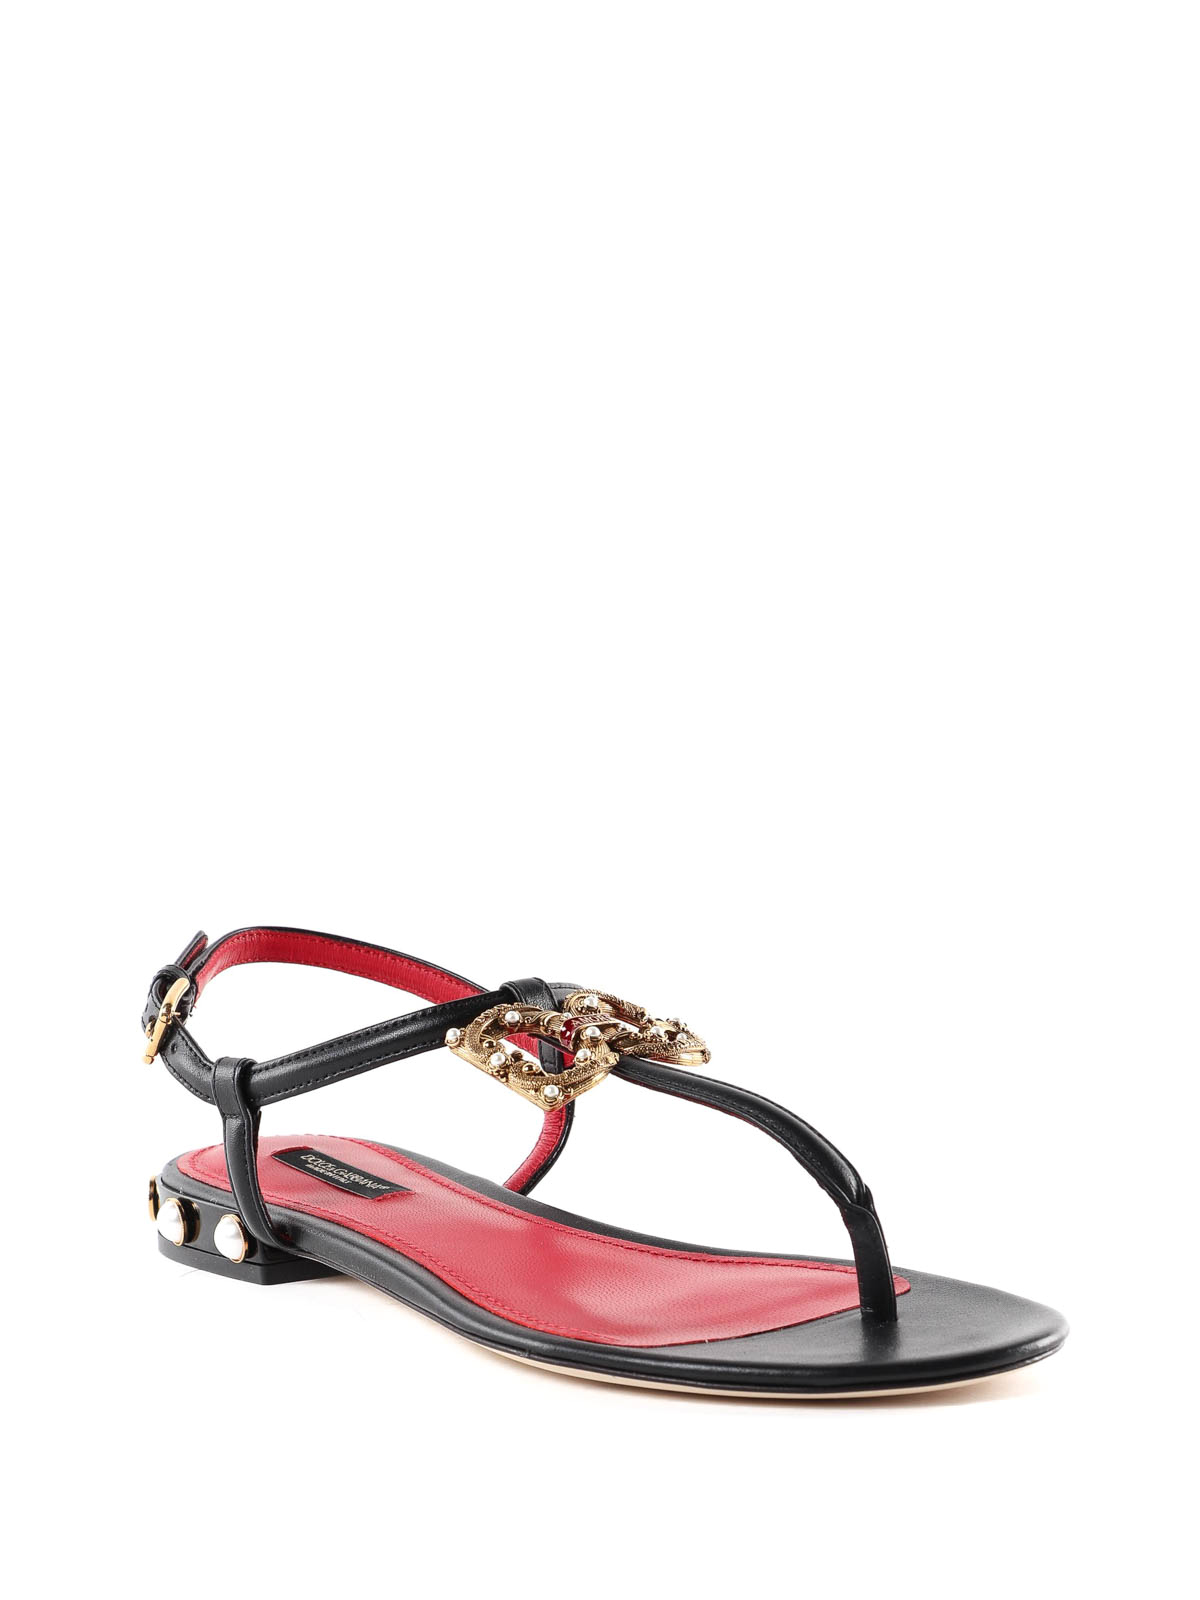 DG Amore leather thong sandals 